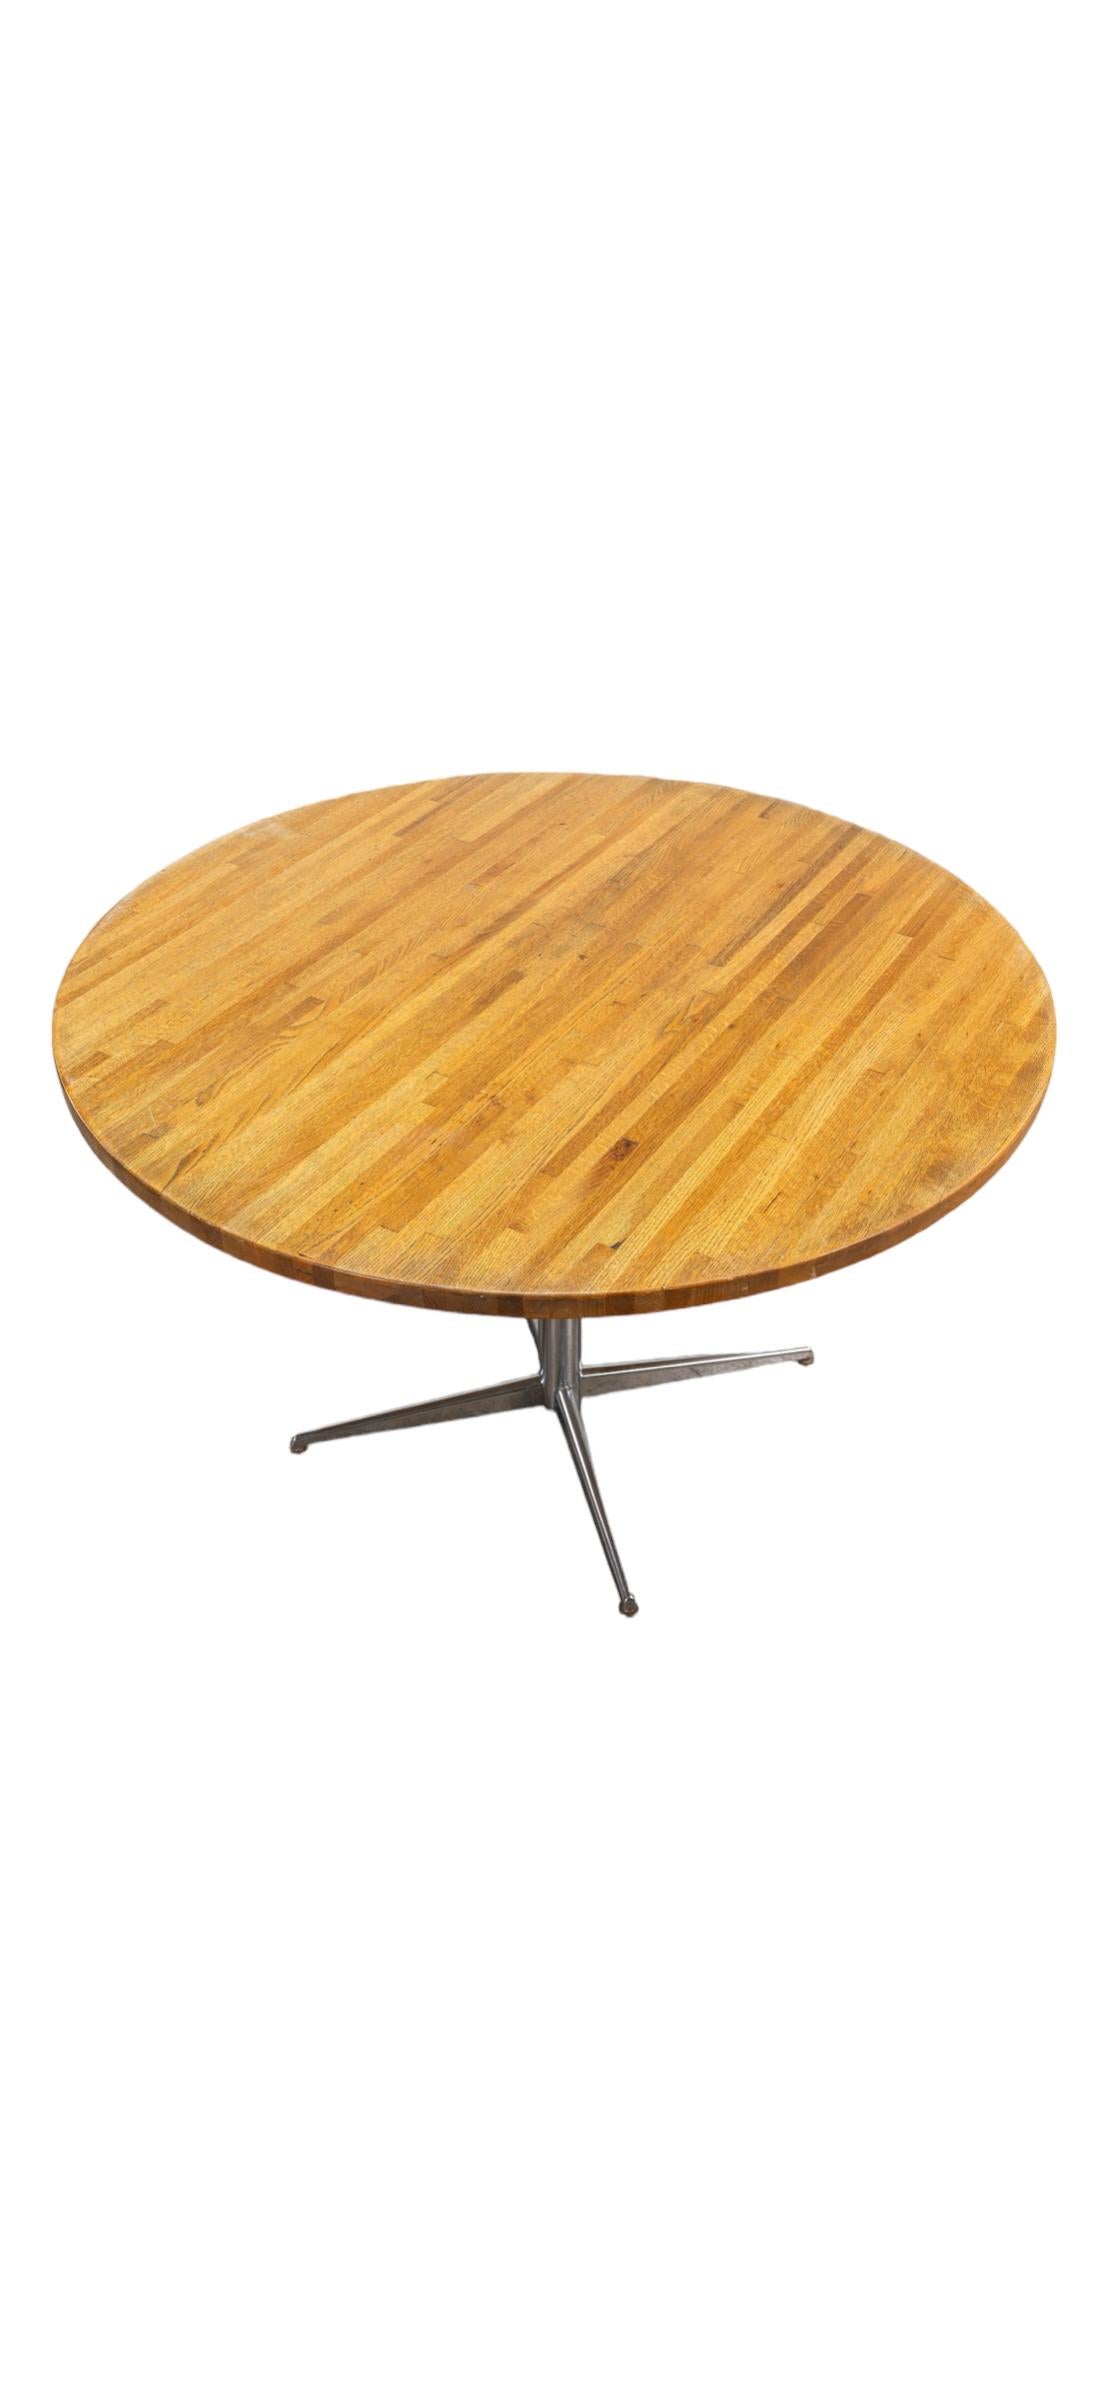 48” diameter round dining table. Elegant and efficient silhouette. Handsome as the main dining table in an apartment or perfect as a kitchen table in a home. In good condition with a tasteful refresh. Solid butcher block is sturdy atop cast metal